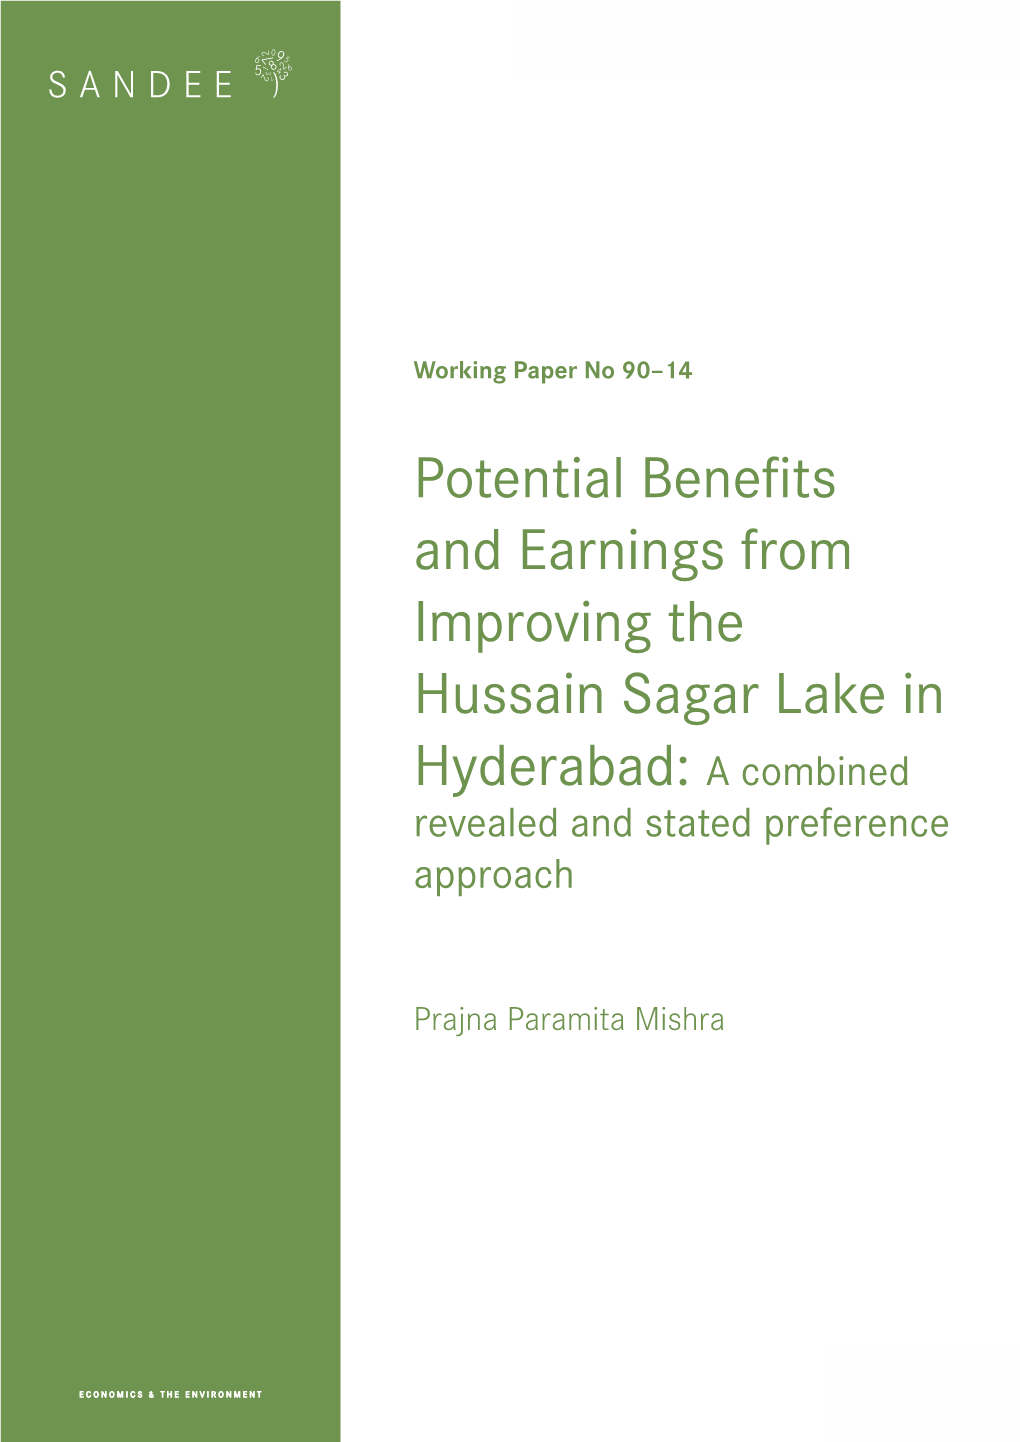 Potential Benefits and Earnings from Improving the Hussain Sagar Lake in Hyderabad: a Combined Revealed and Stated Preference Approach